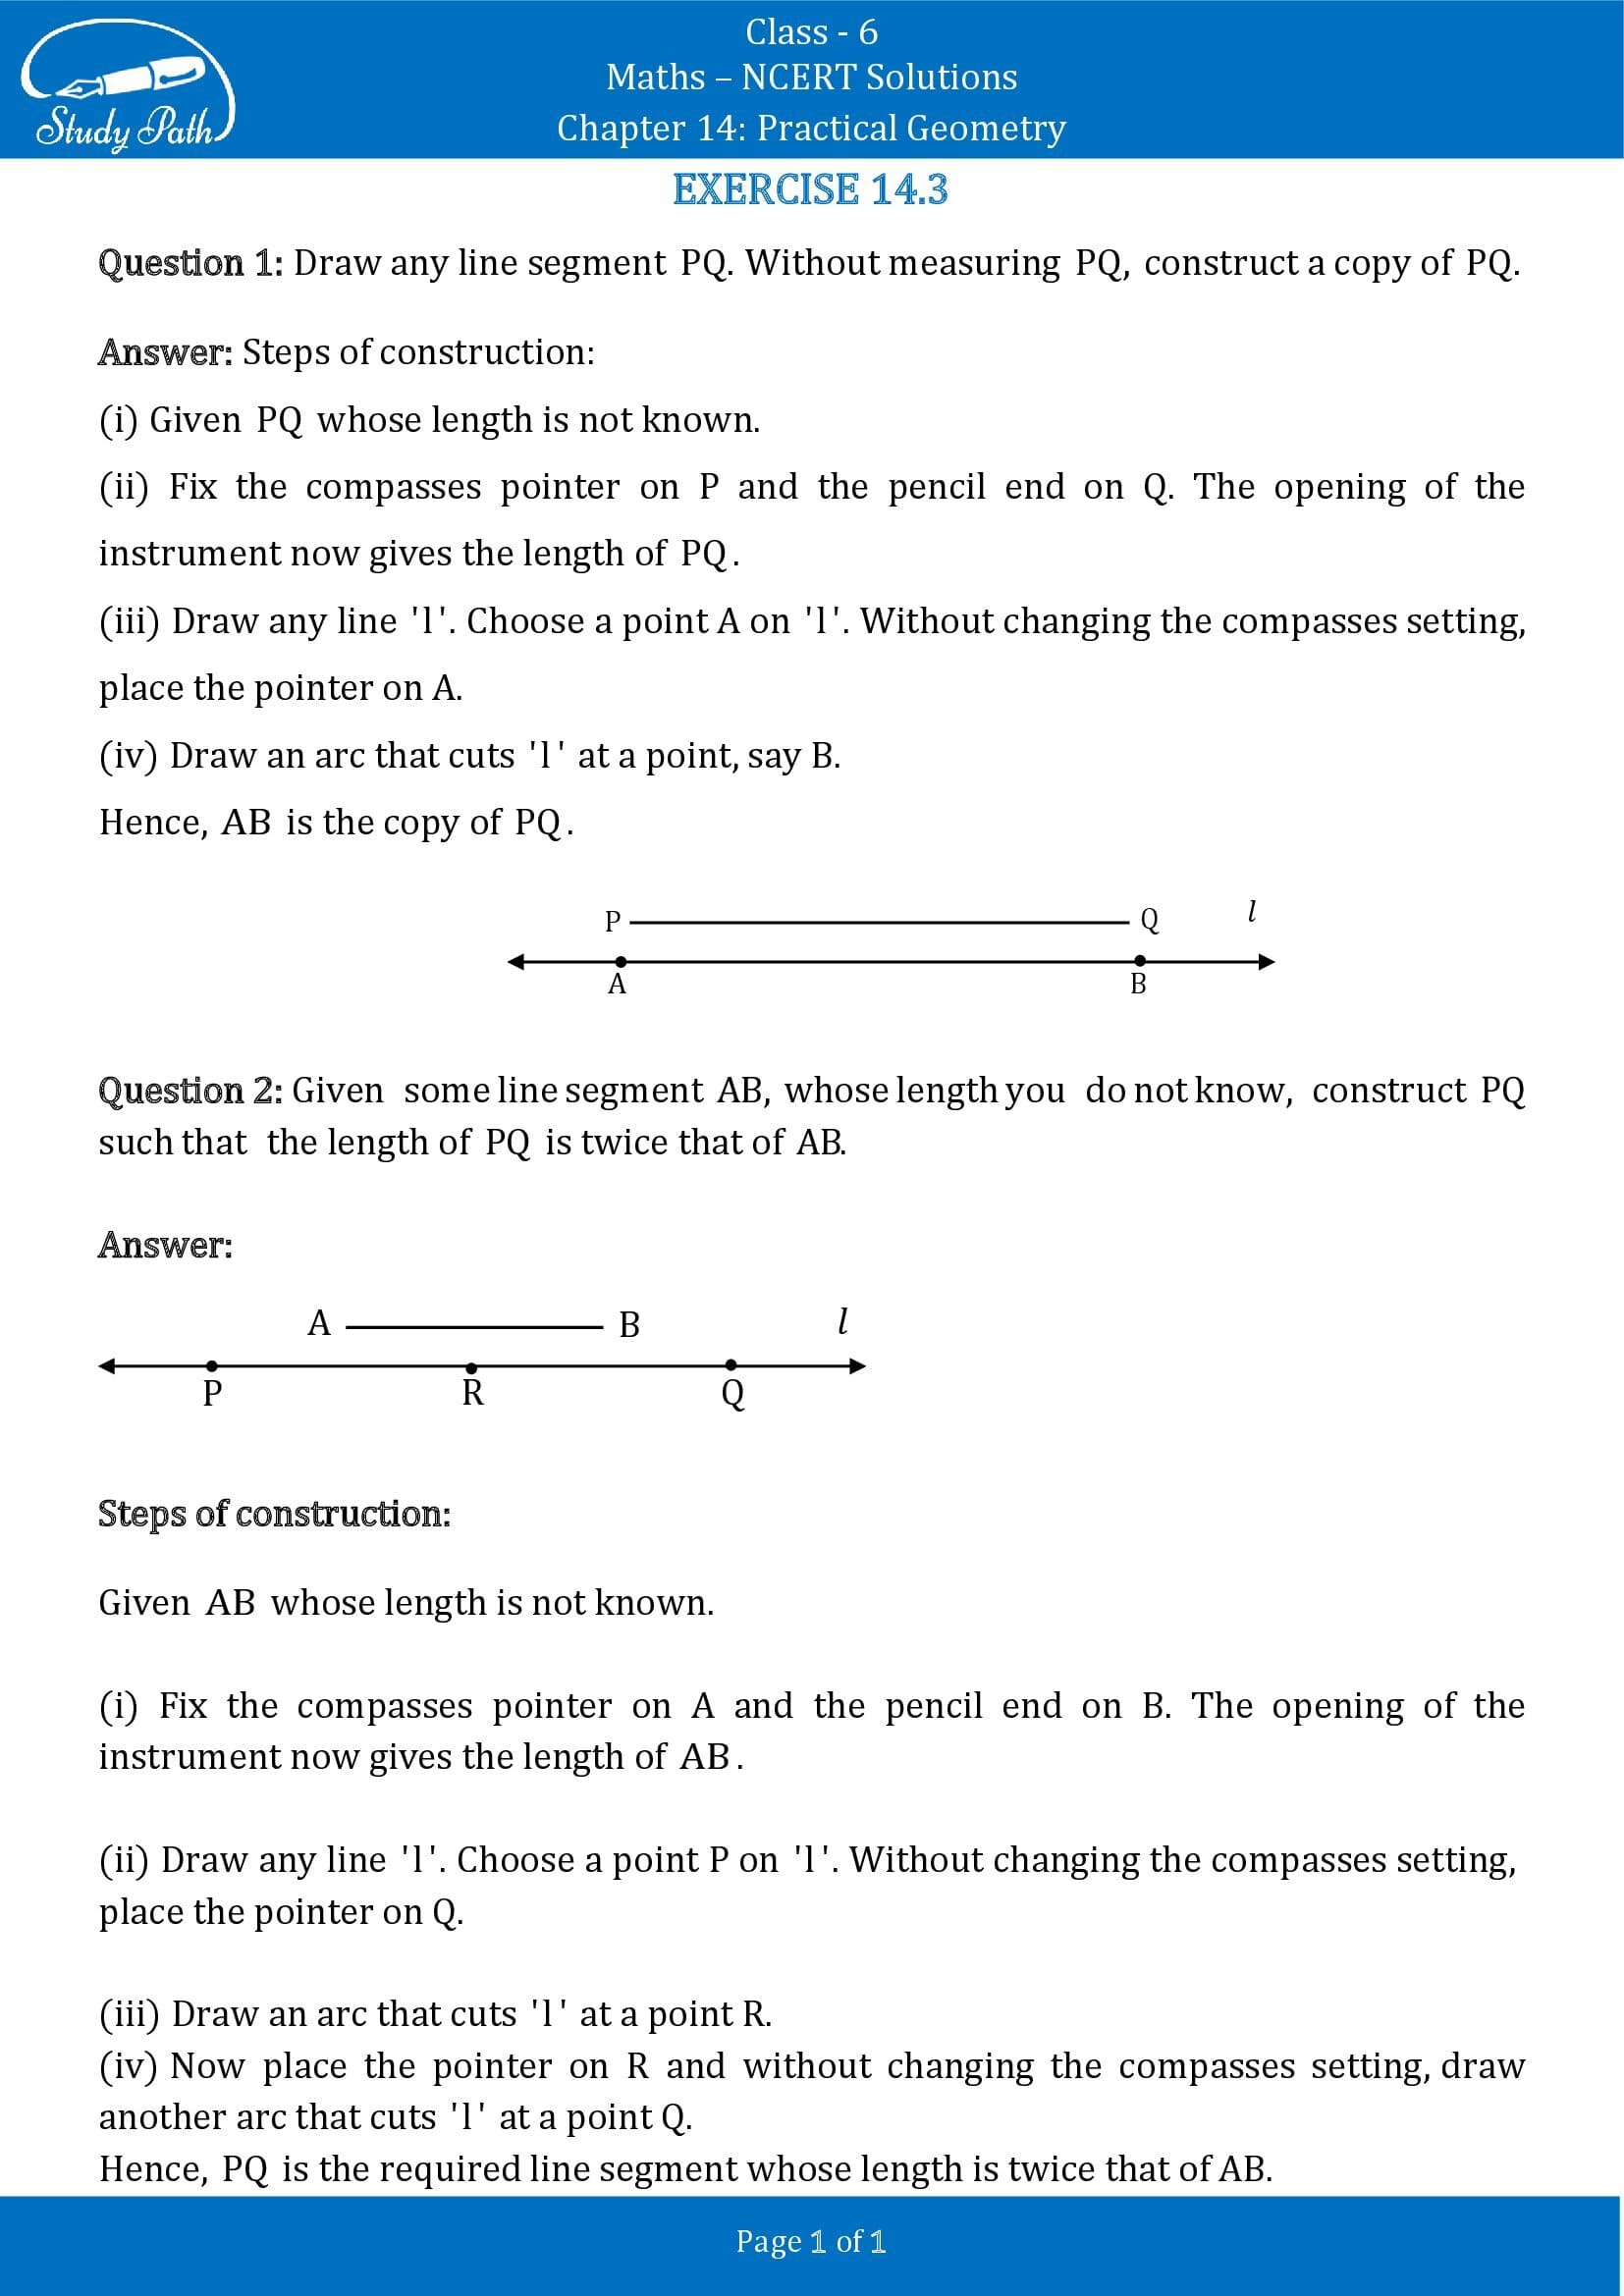 NCERT Solutions for Class 6 Maths Chapter 14 Practical Geometry Exercise 14.3